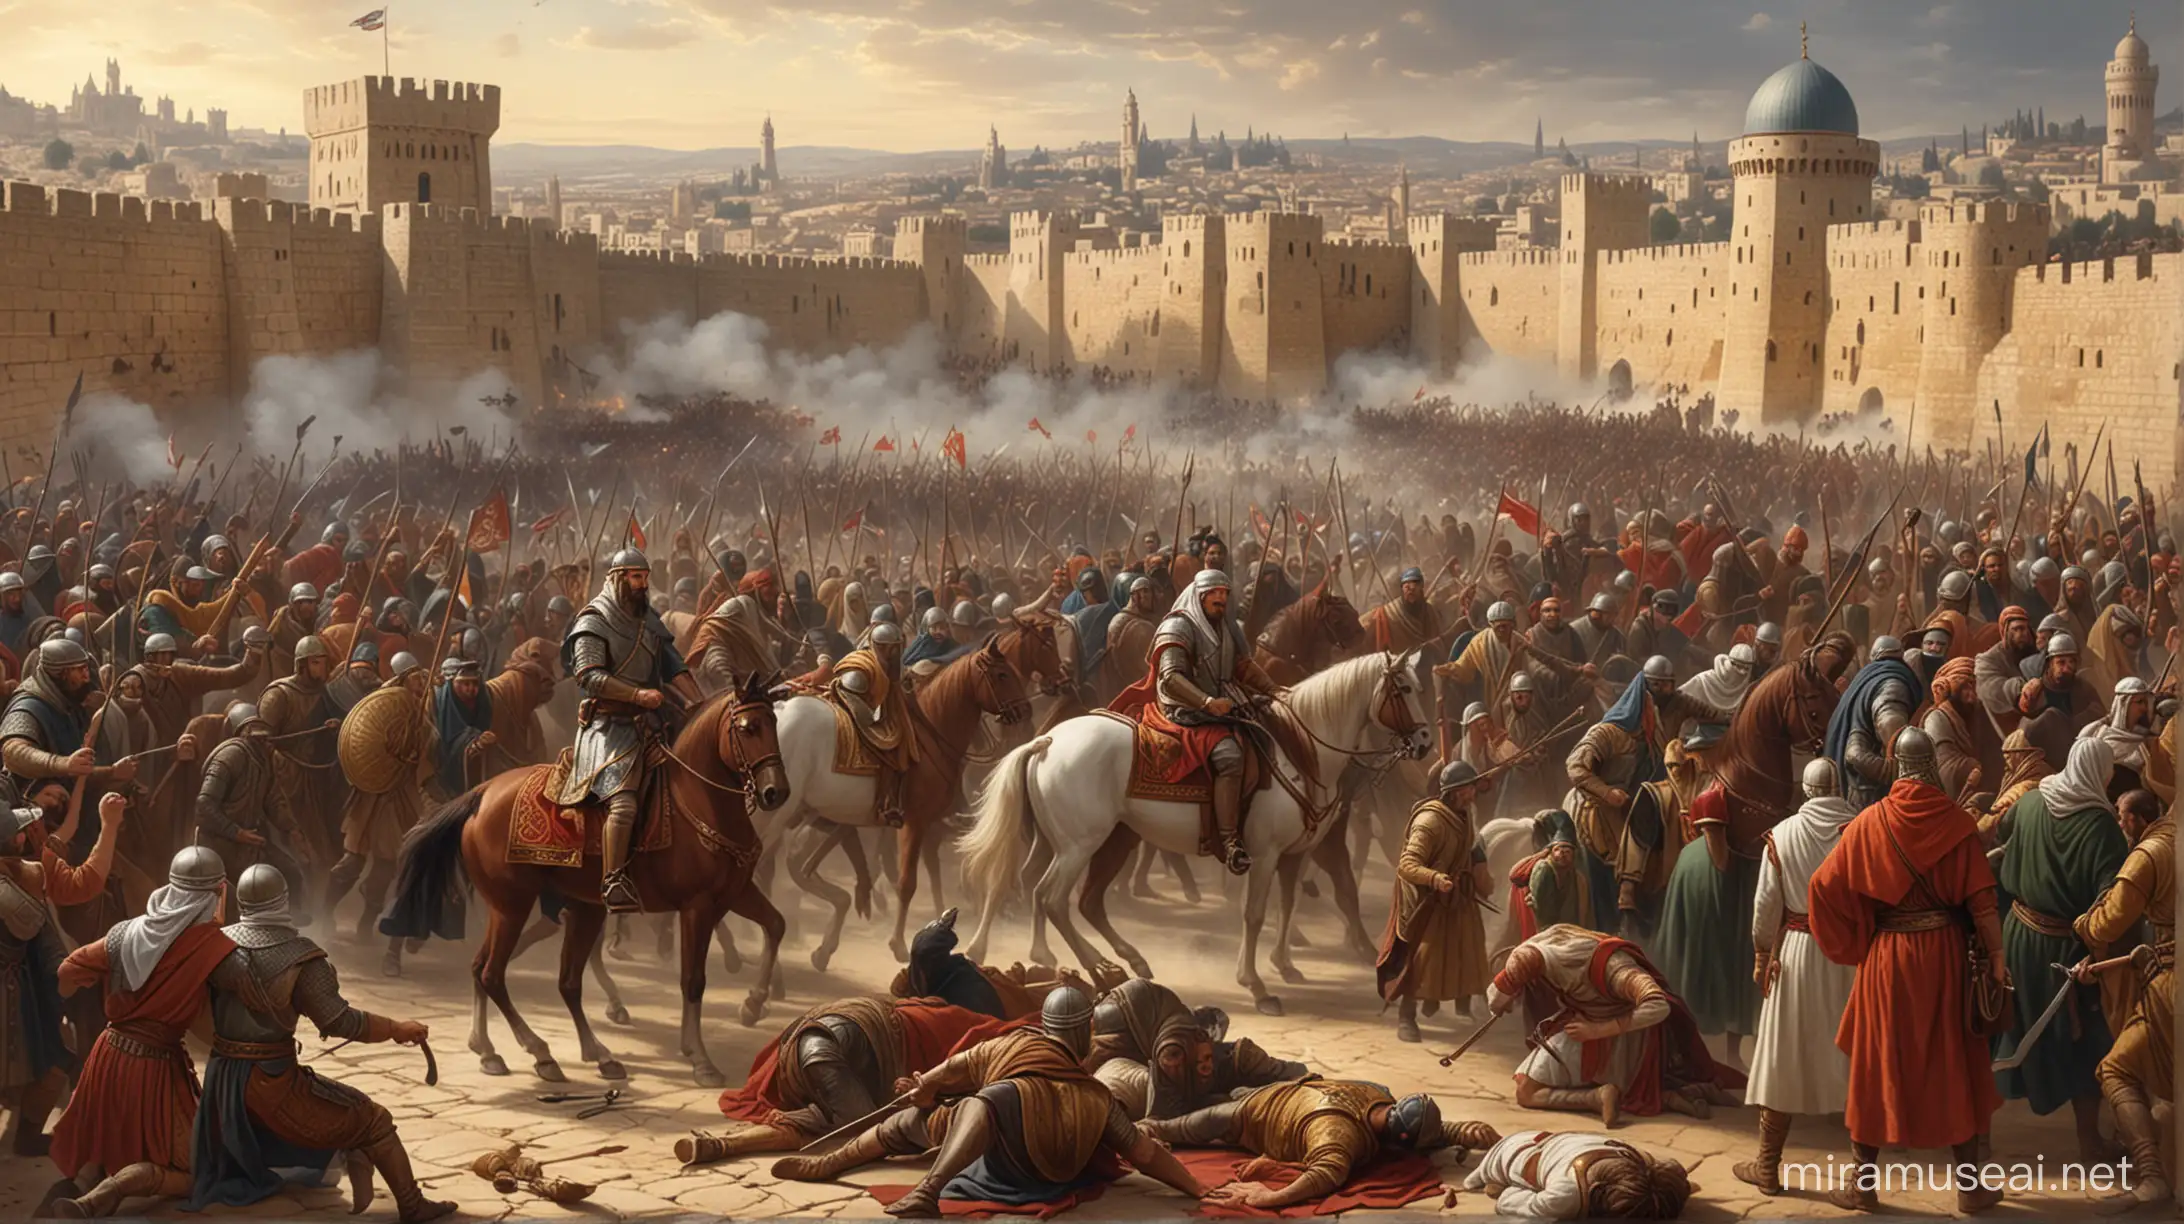 king richard  defeated by muslims in Jerusalem